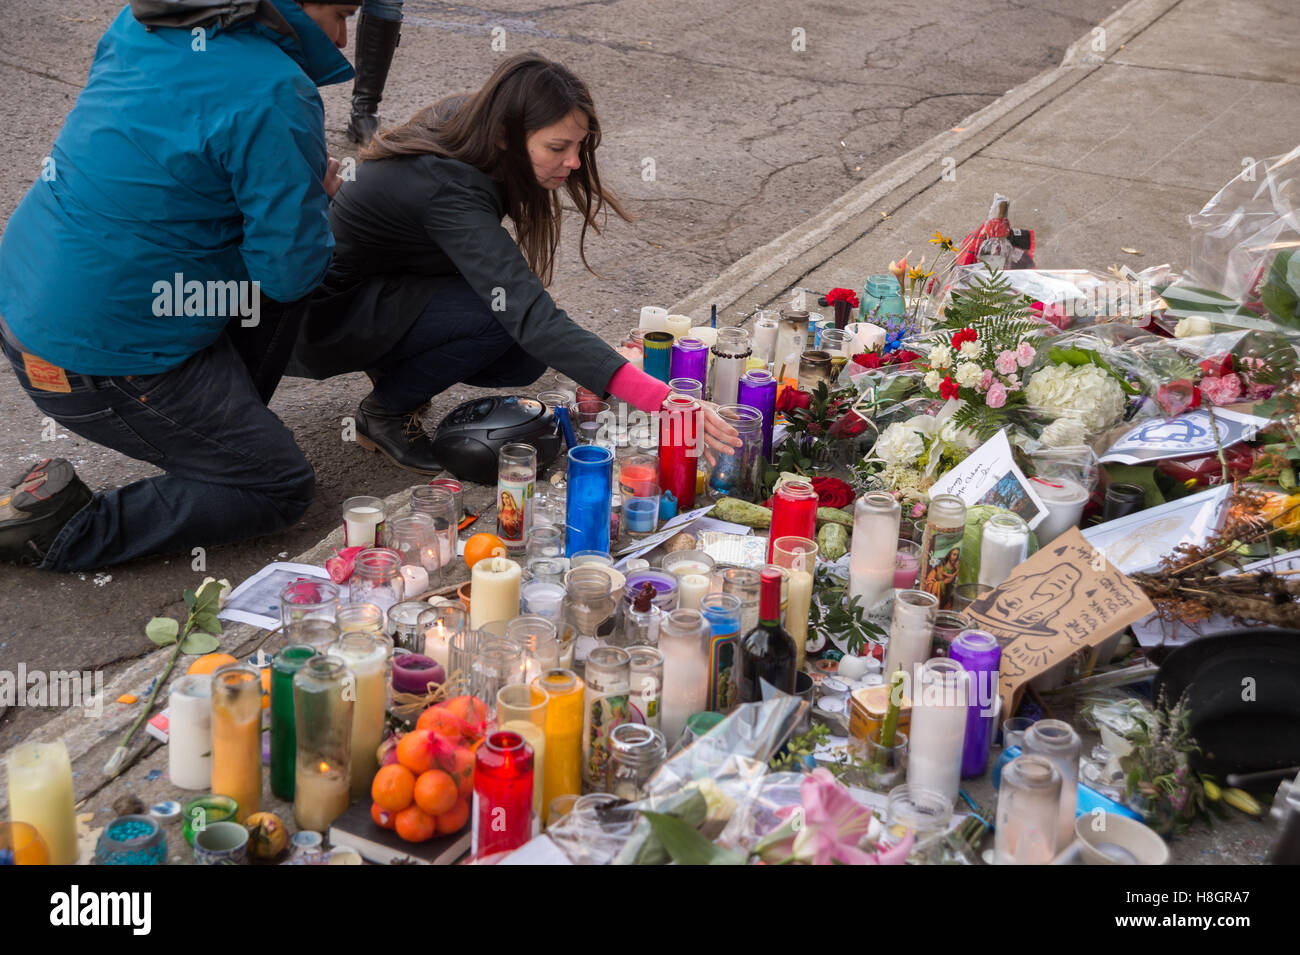 Montreal, Canada. 12th November, 2016. Montrealers gather outside Leonard Cohen's house on Vallieres street to pay respects to the artist who died on November 7th. Credit:  Marc Bruxelle/Alamy Live News Stock Photo